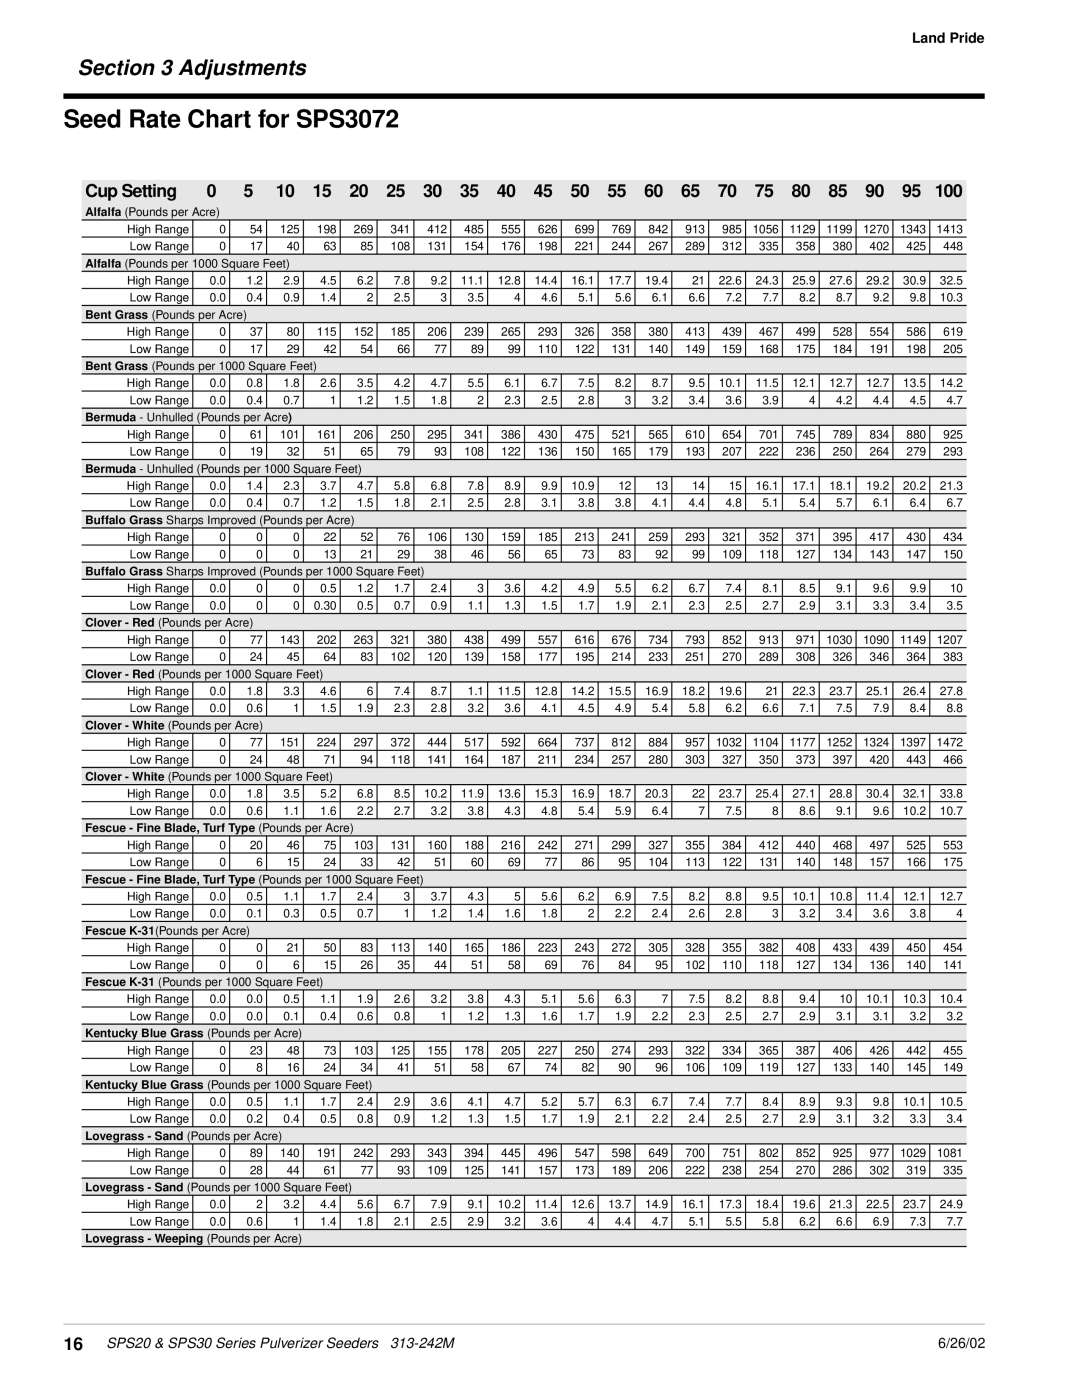 Land Pride SPS20 manual Seed Rate Chart for SPS3072, Adjustments, Cup Setting, Land Pride, 6/26/02 